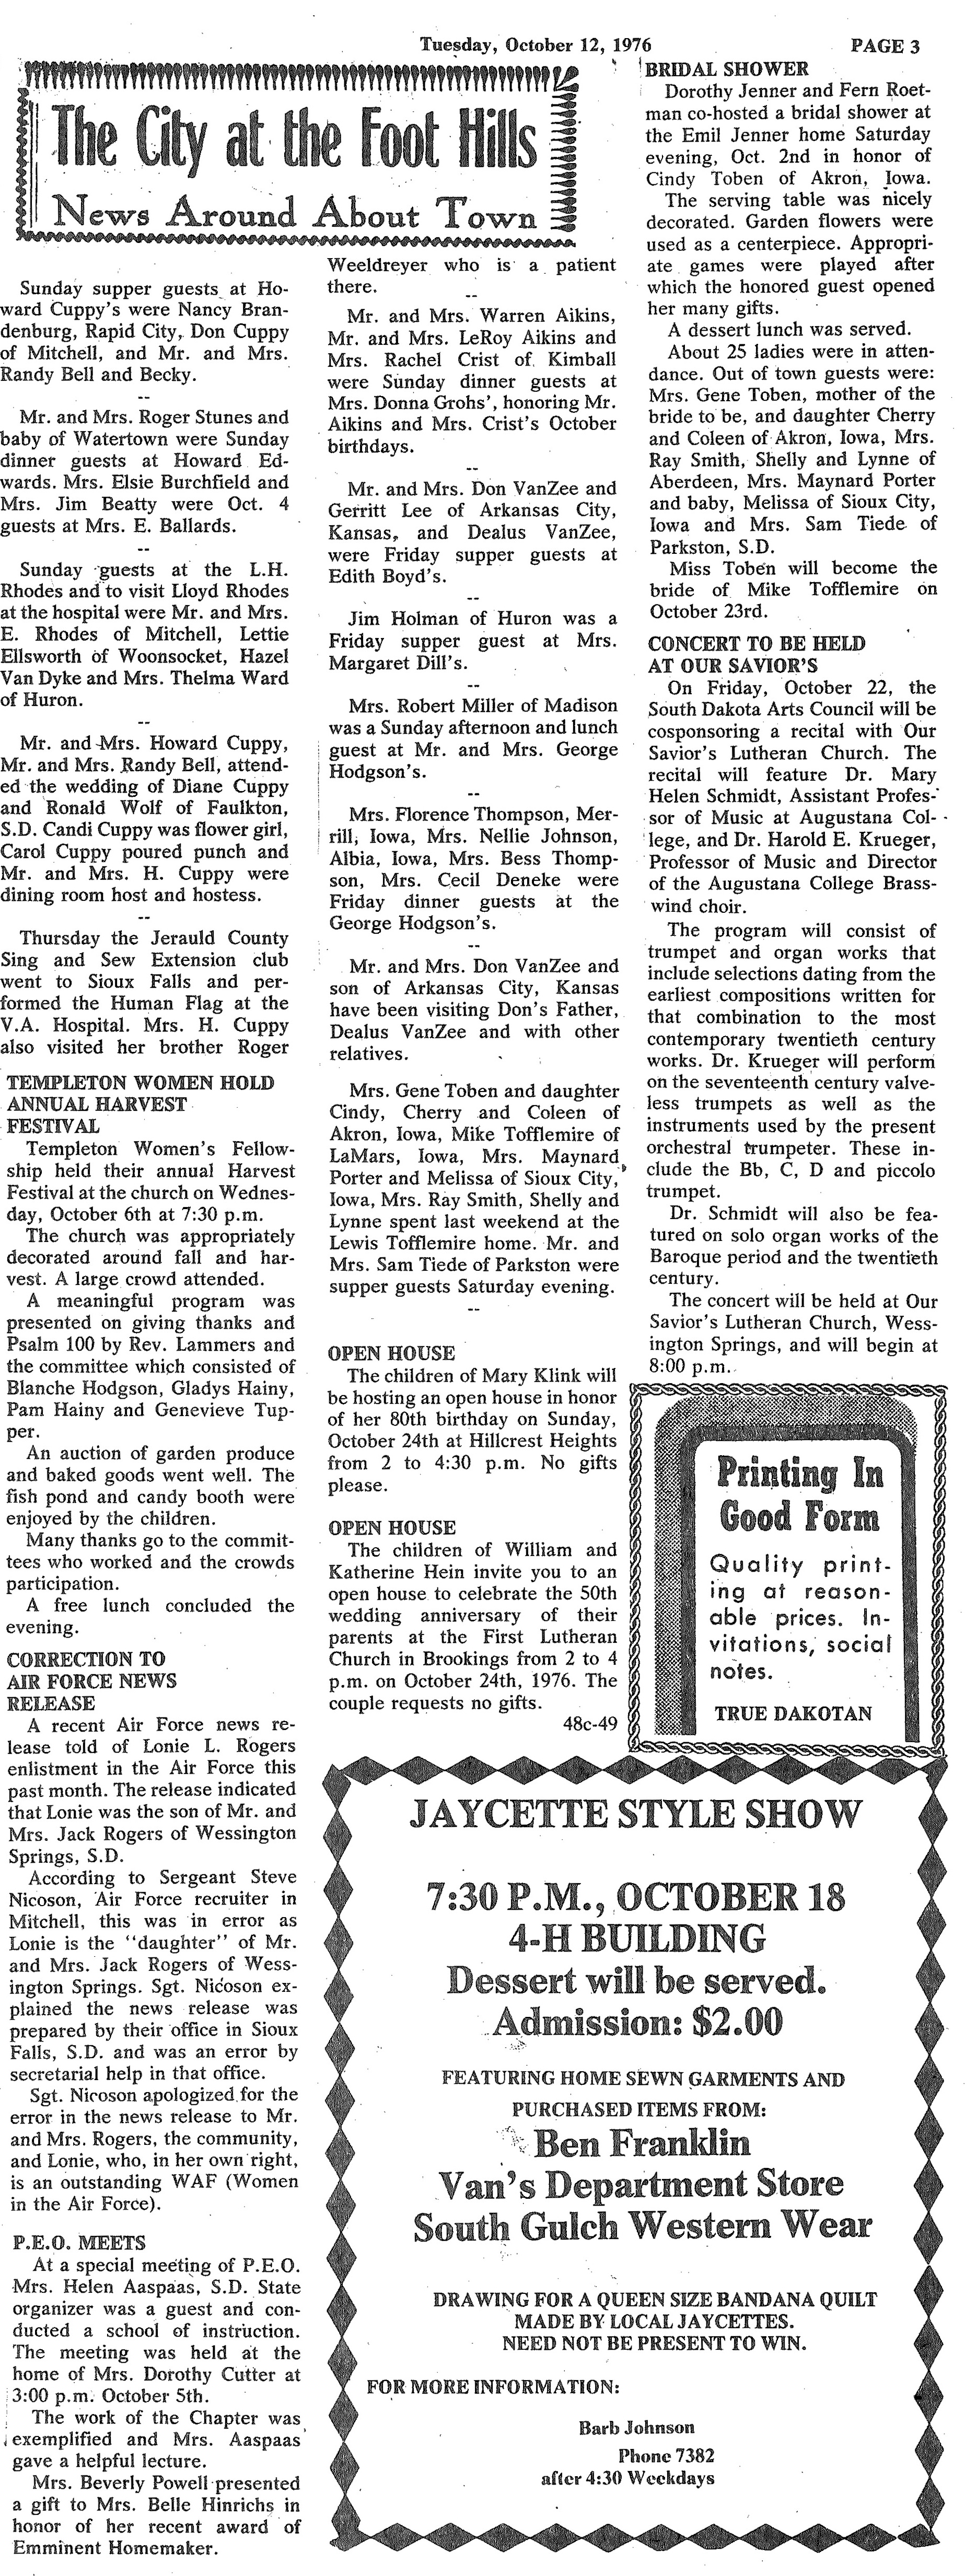 Originally published as “The City at the Foothills News Around Town,” an early society column by Cuppy can be seen in a scan from the October 12, 1976 edition of the True Dakotan.